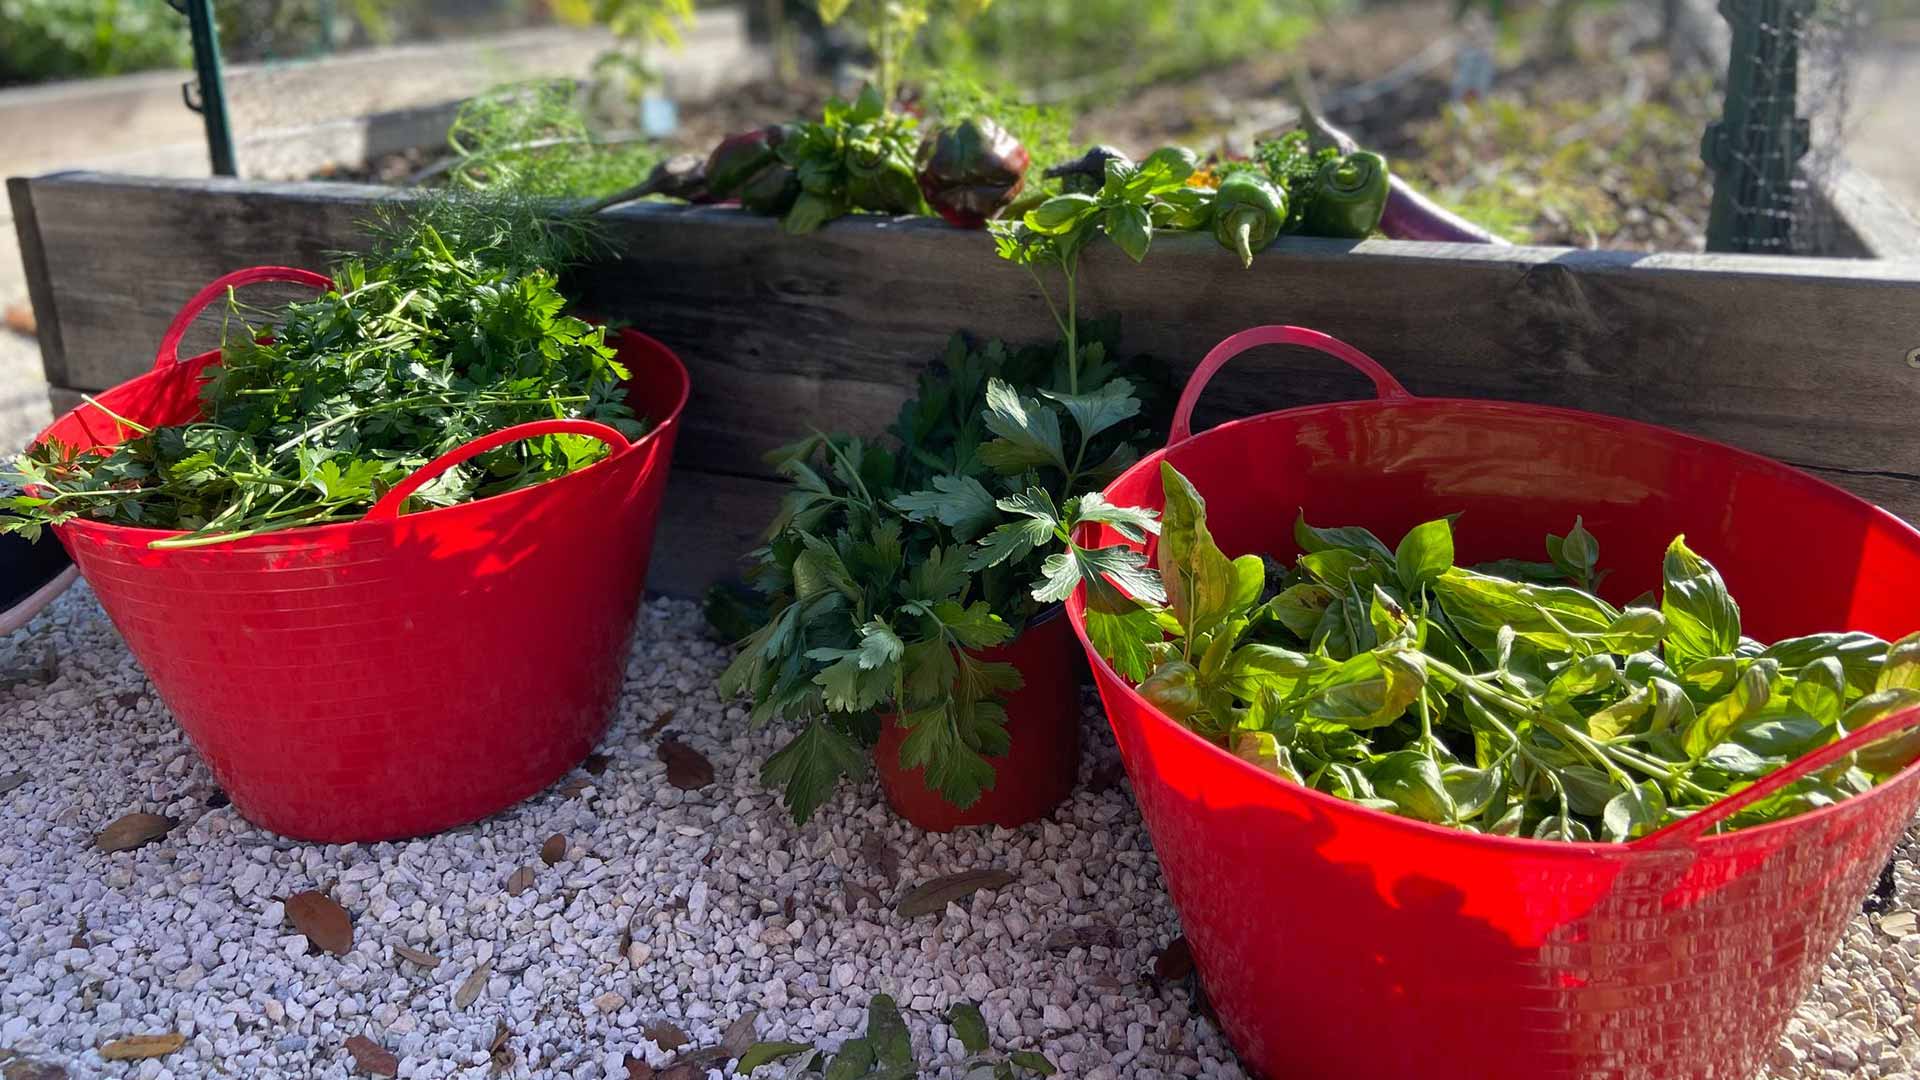 two red baskets filled with cut greens in front of a raised garden bed